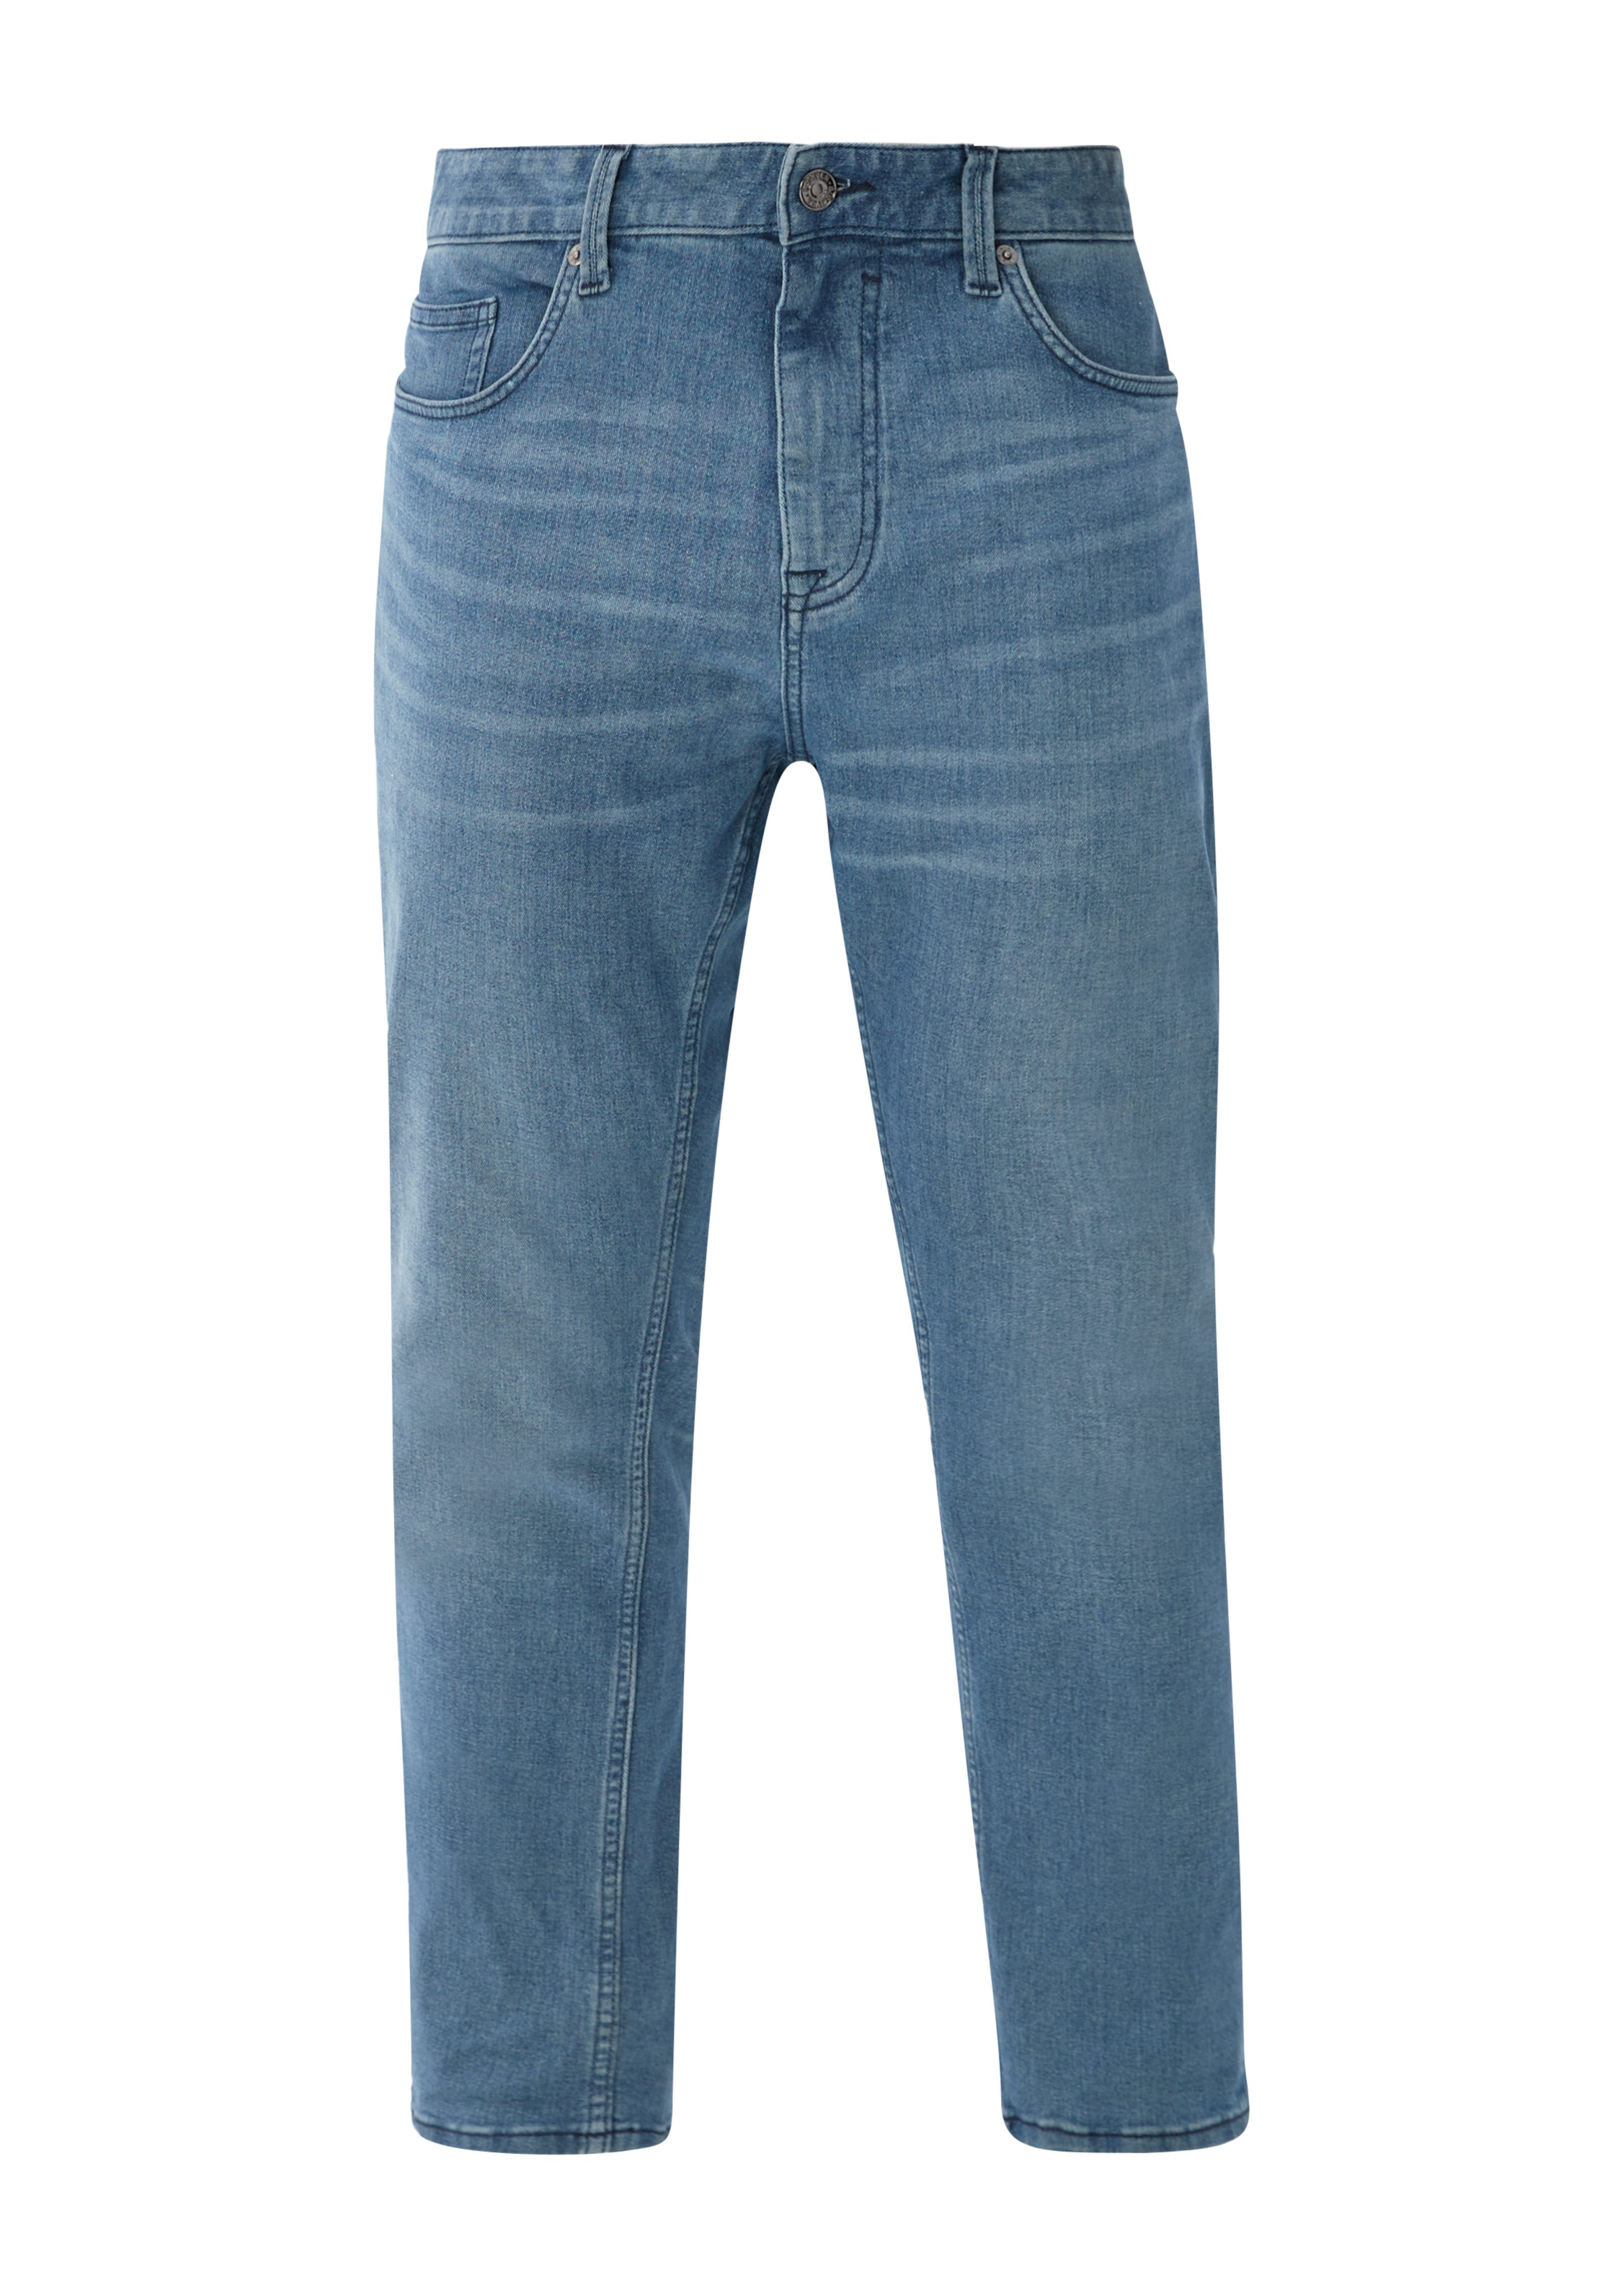 Destroyes Casby Leg Straight Relaxed Mid hellblau / / Rise s.Oliver Fit Jeans Stoffhose /